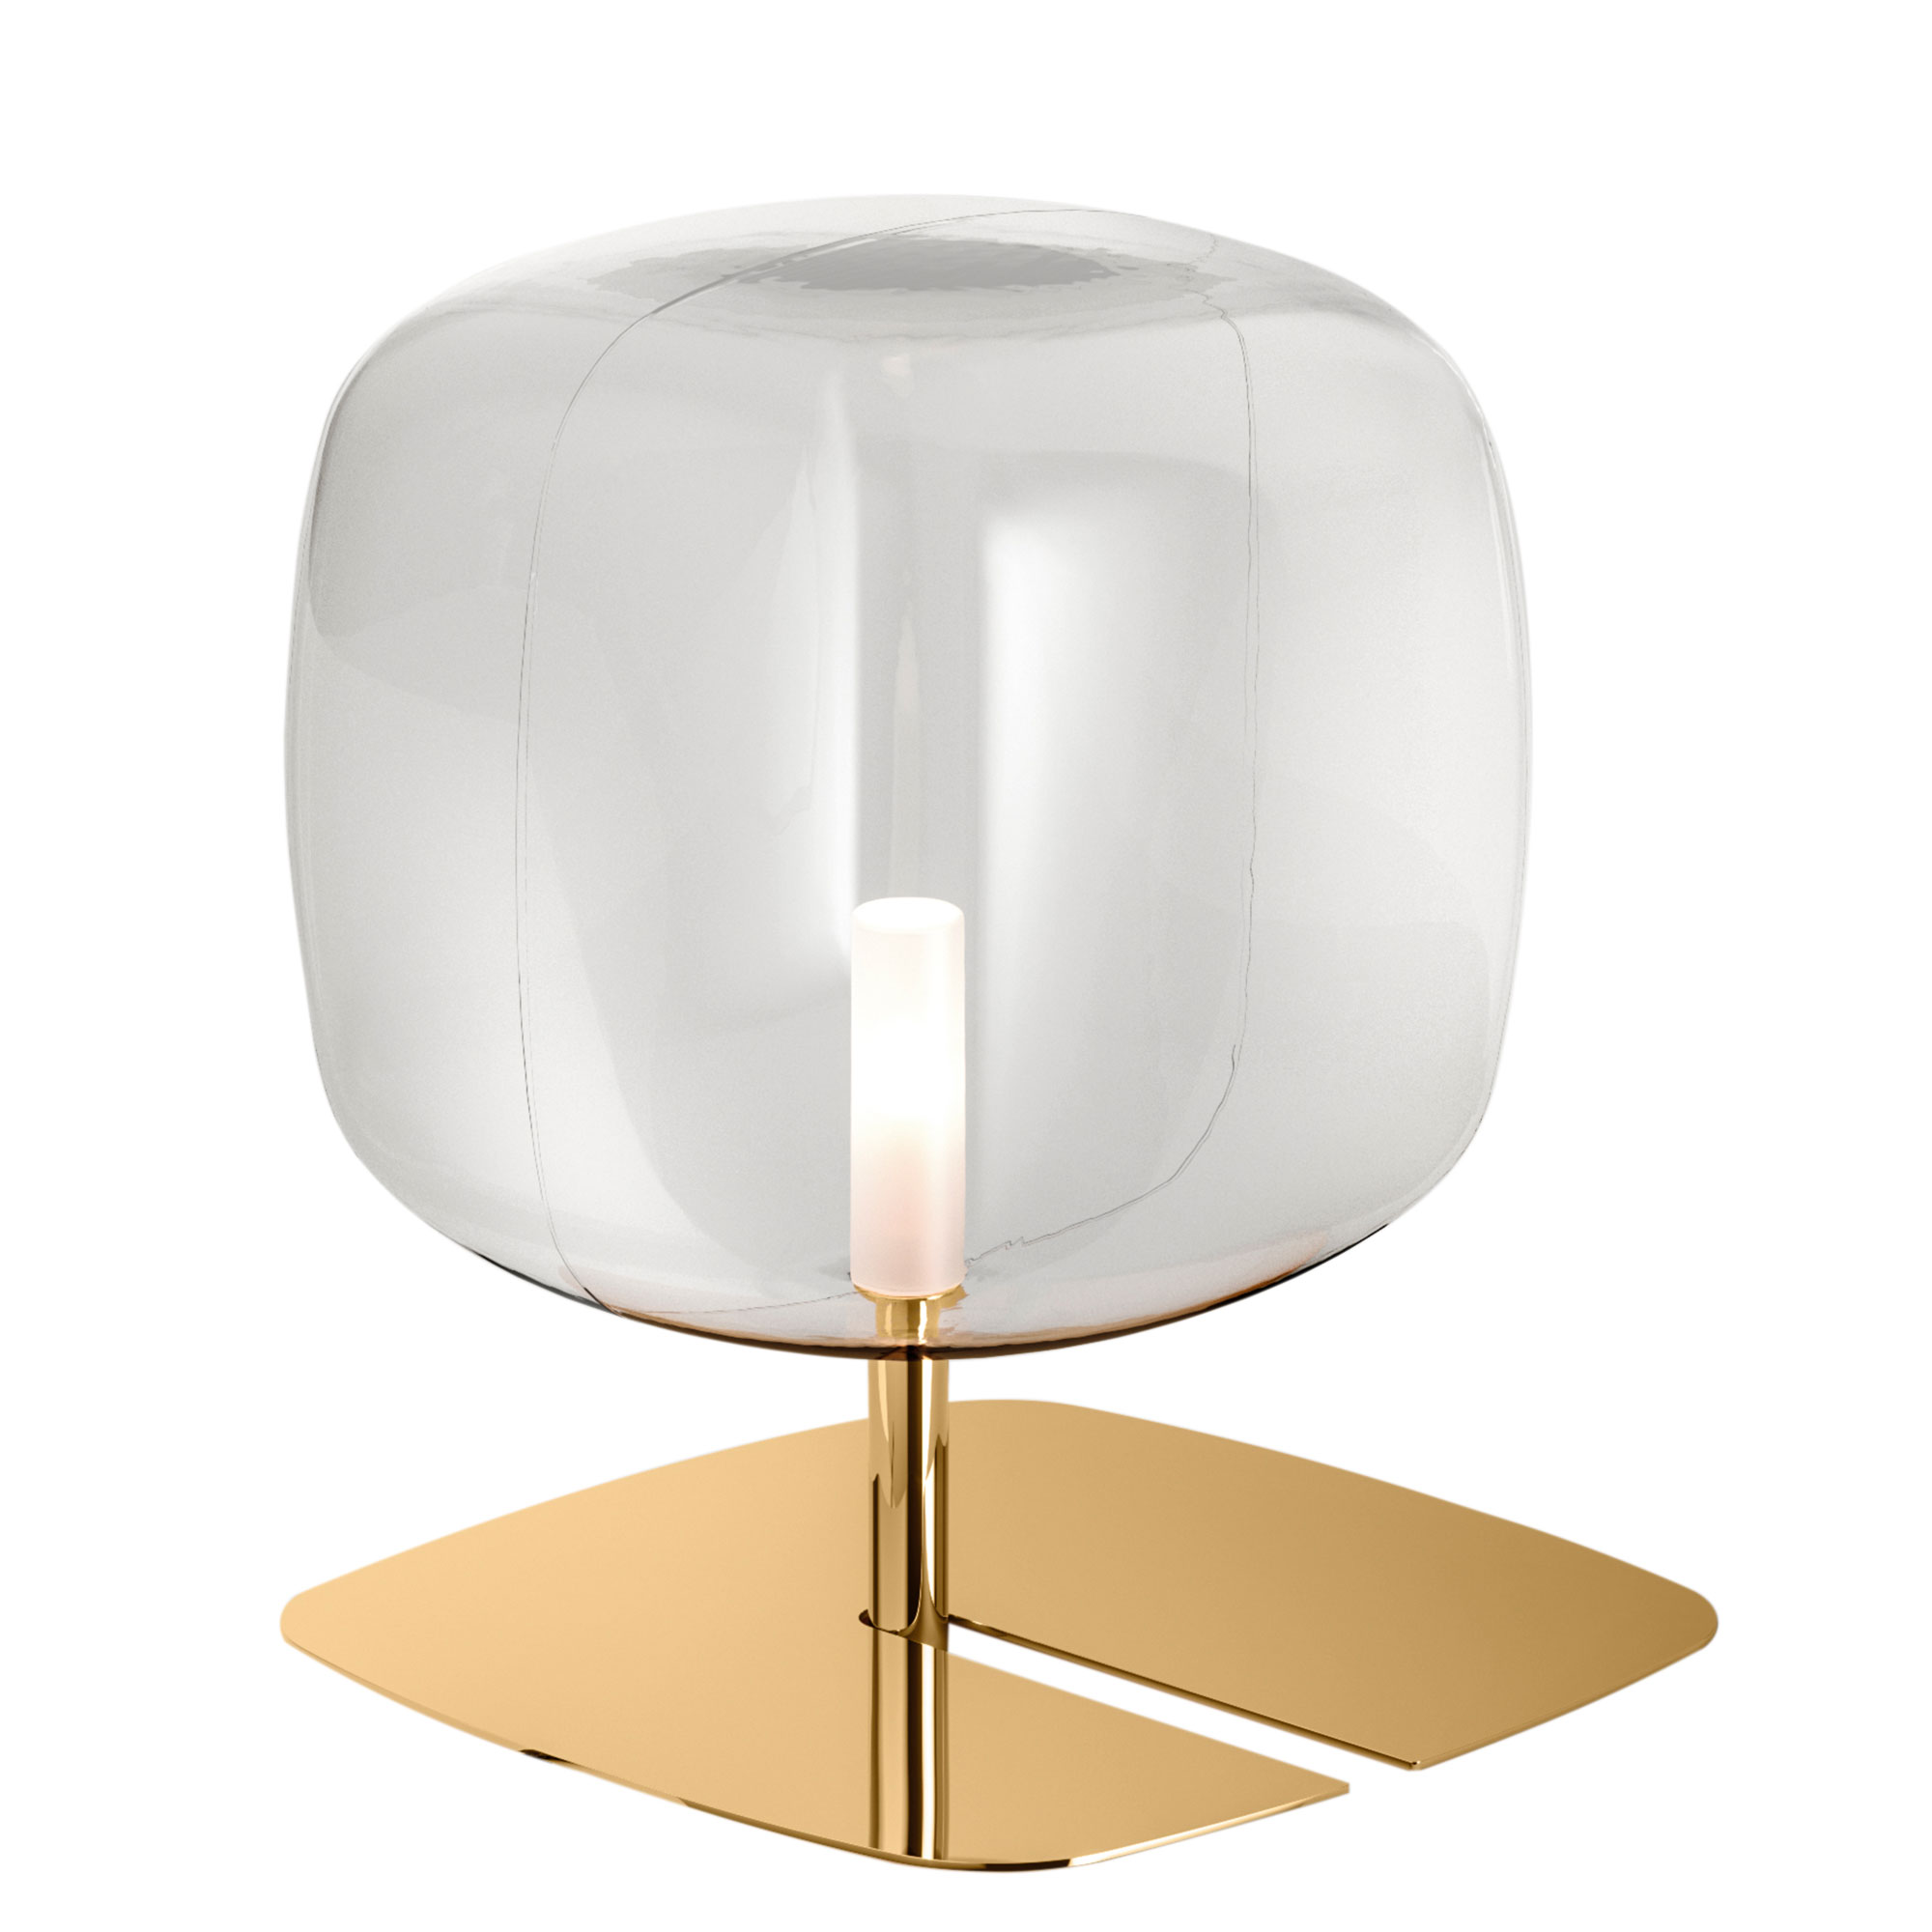 Tonelli Hyperion Table Lamp, Square, Gold | Barker & Stonehouse